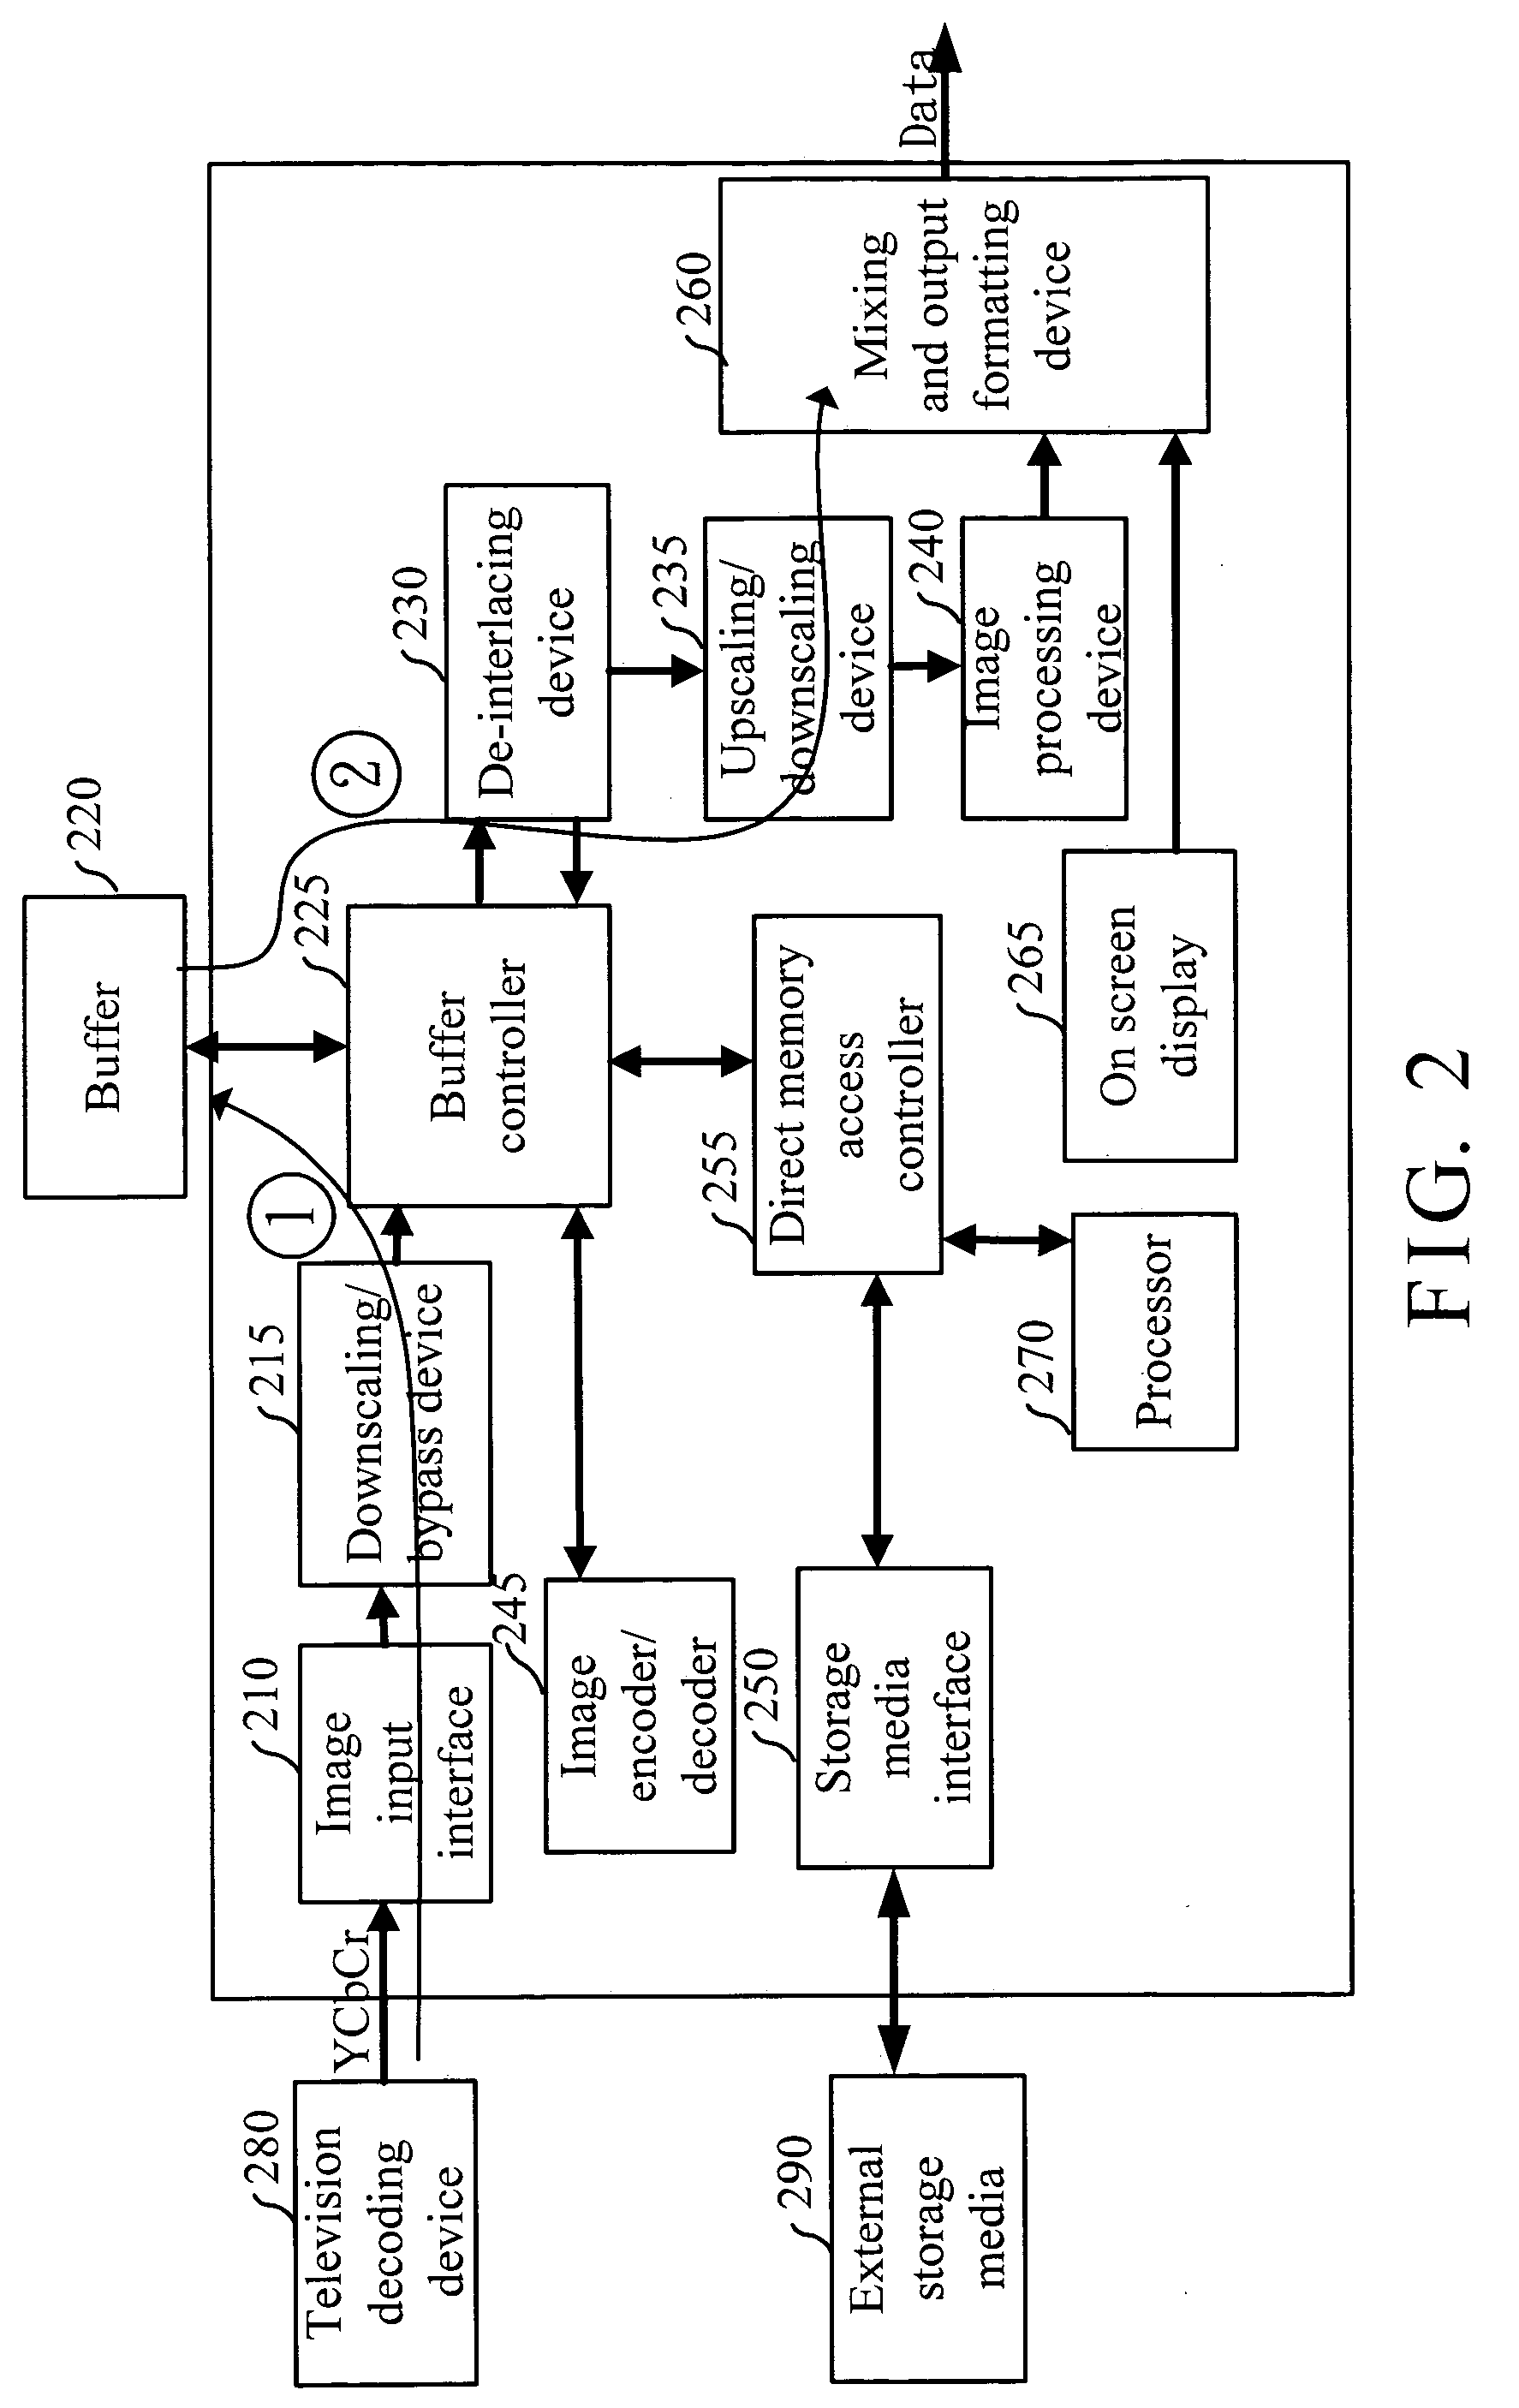 Liquid crystal display system with a storage capability